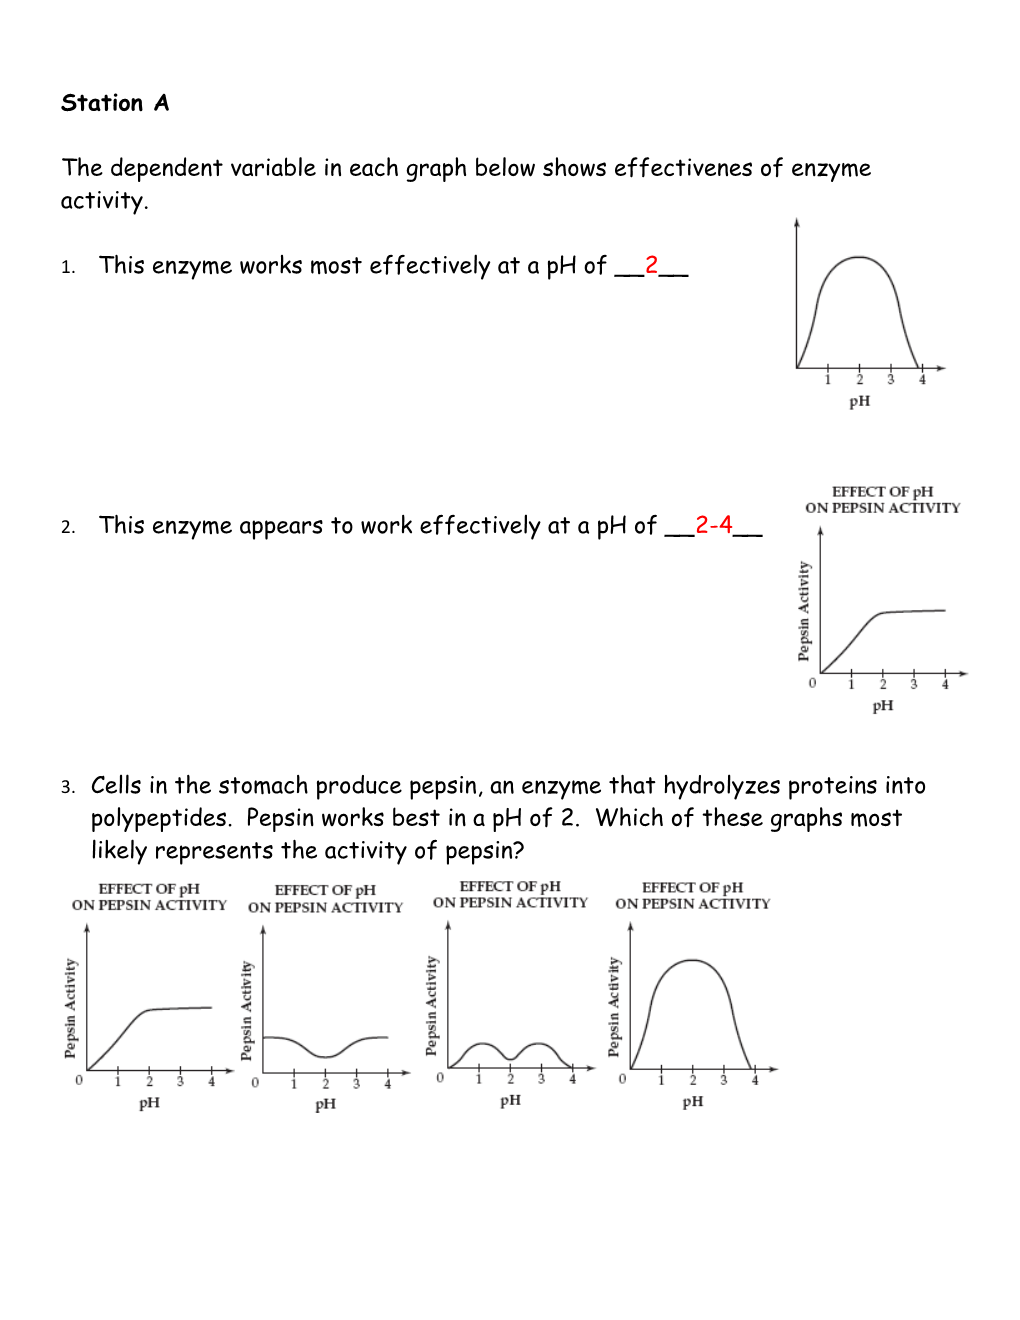 The Dependent Variable in Each Graph Below Shows Effectivenes of Enzyme Activity